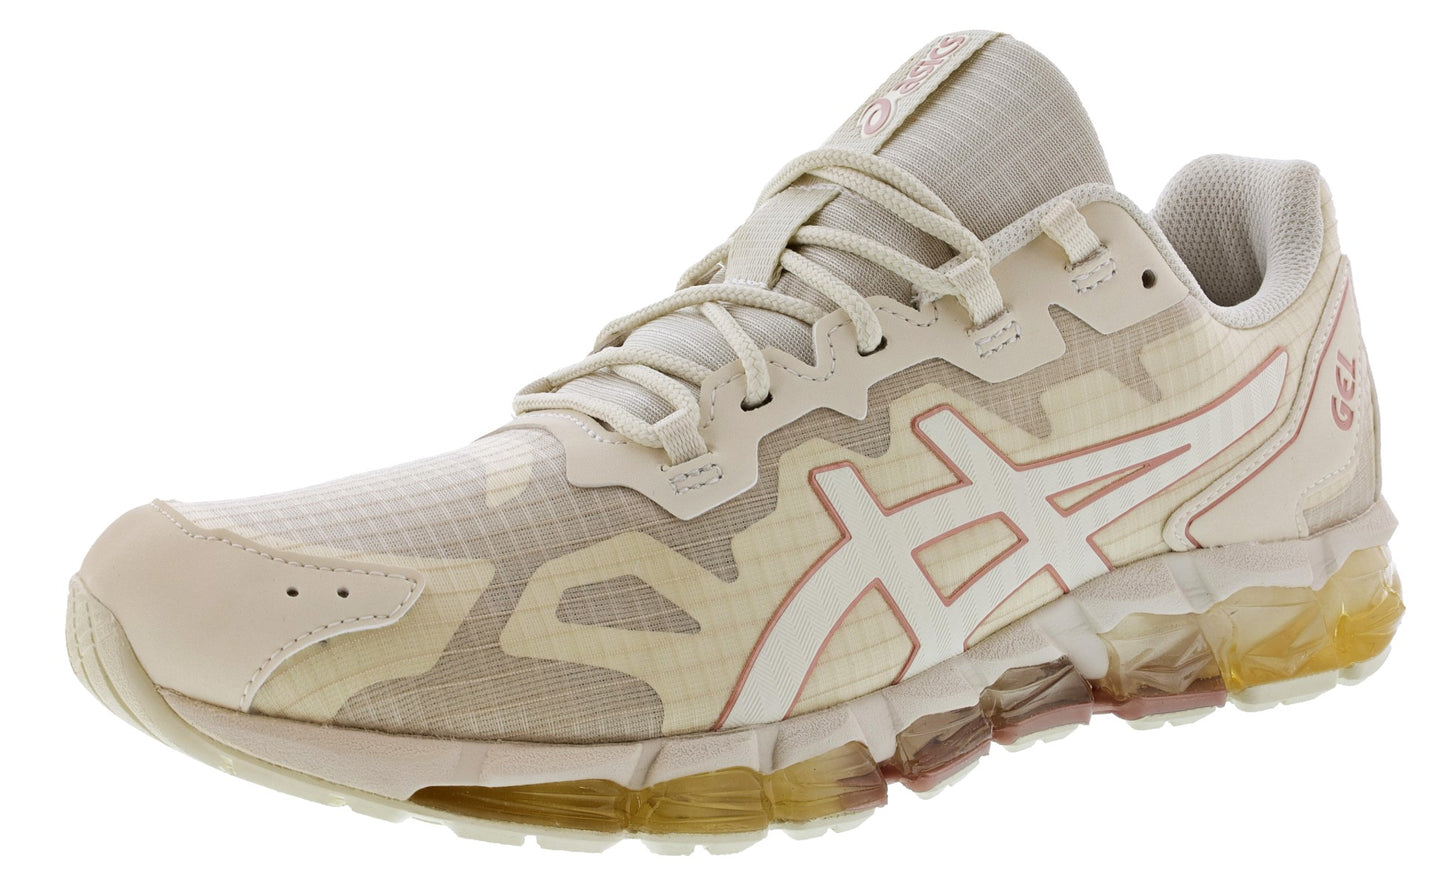 Lateral of Birch/Rose Gold colored Asics Gel-Quantum 360 6 Women's Lightweight Running Shoes